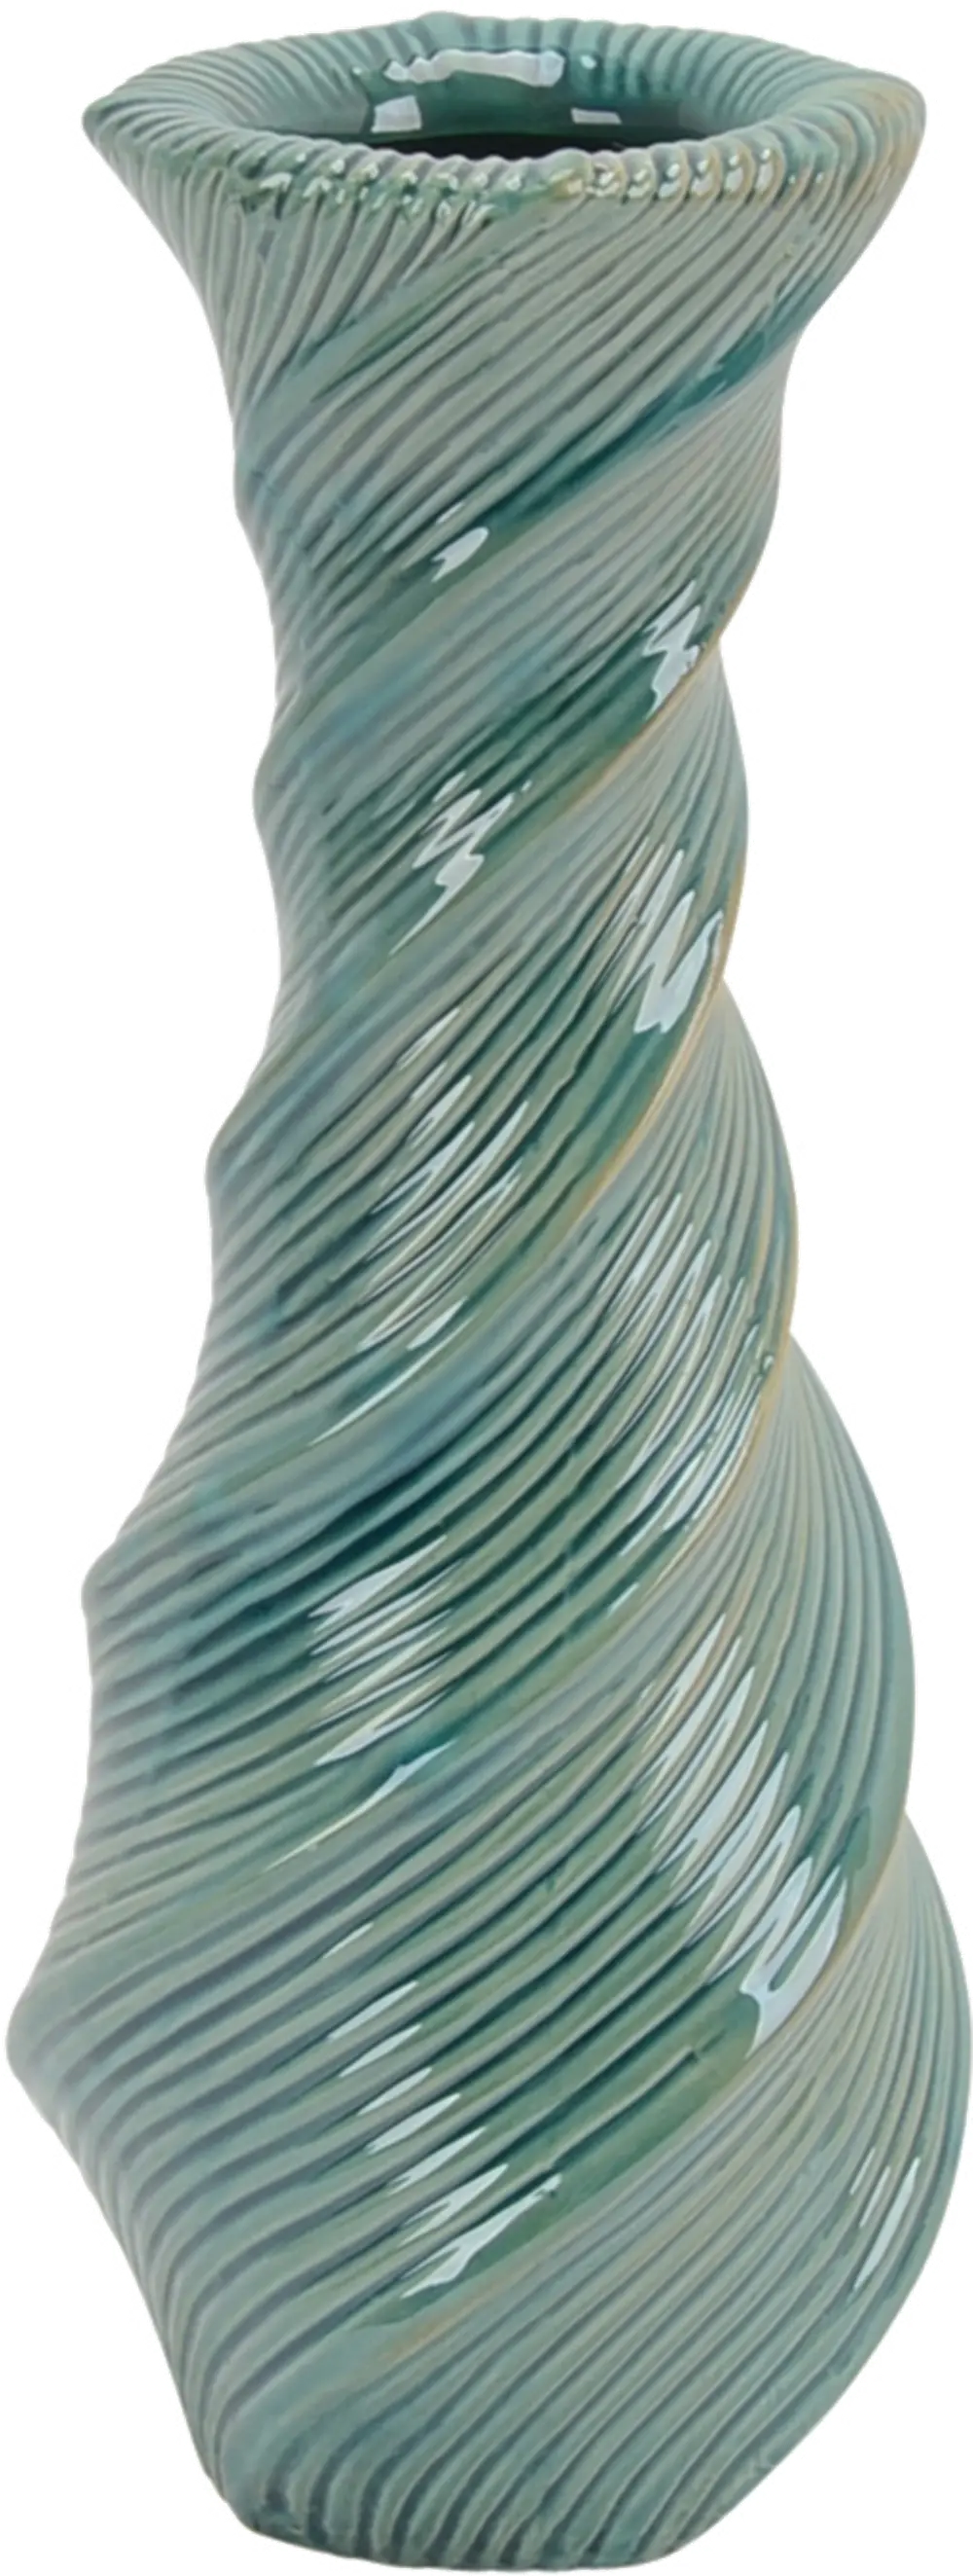 15 Inch Turquoise Ceramic Vase with Swirl Pattern-1